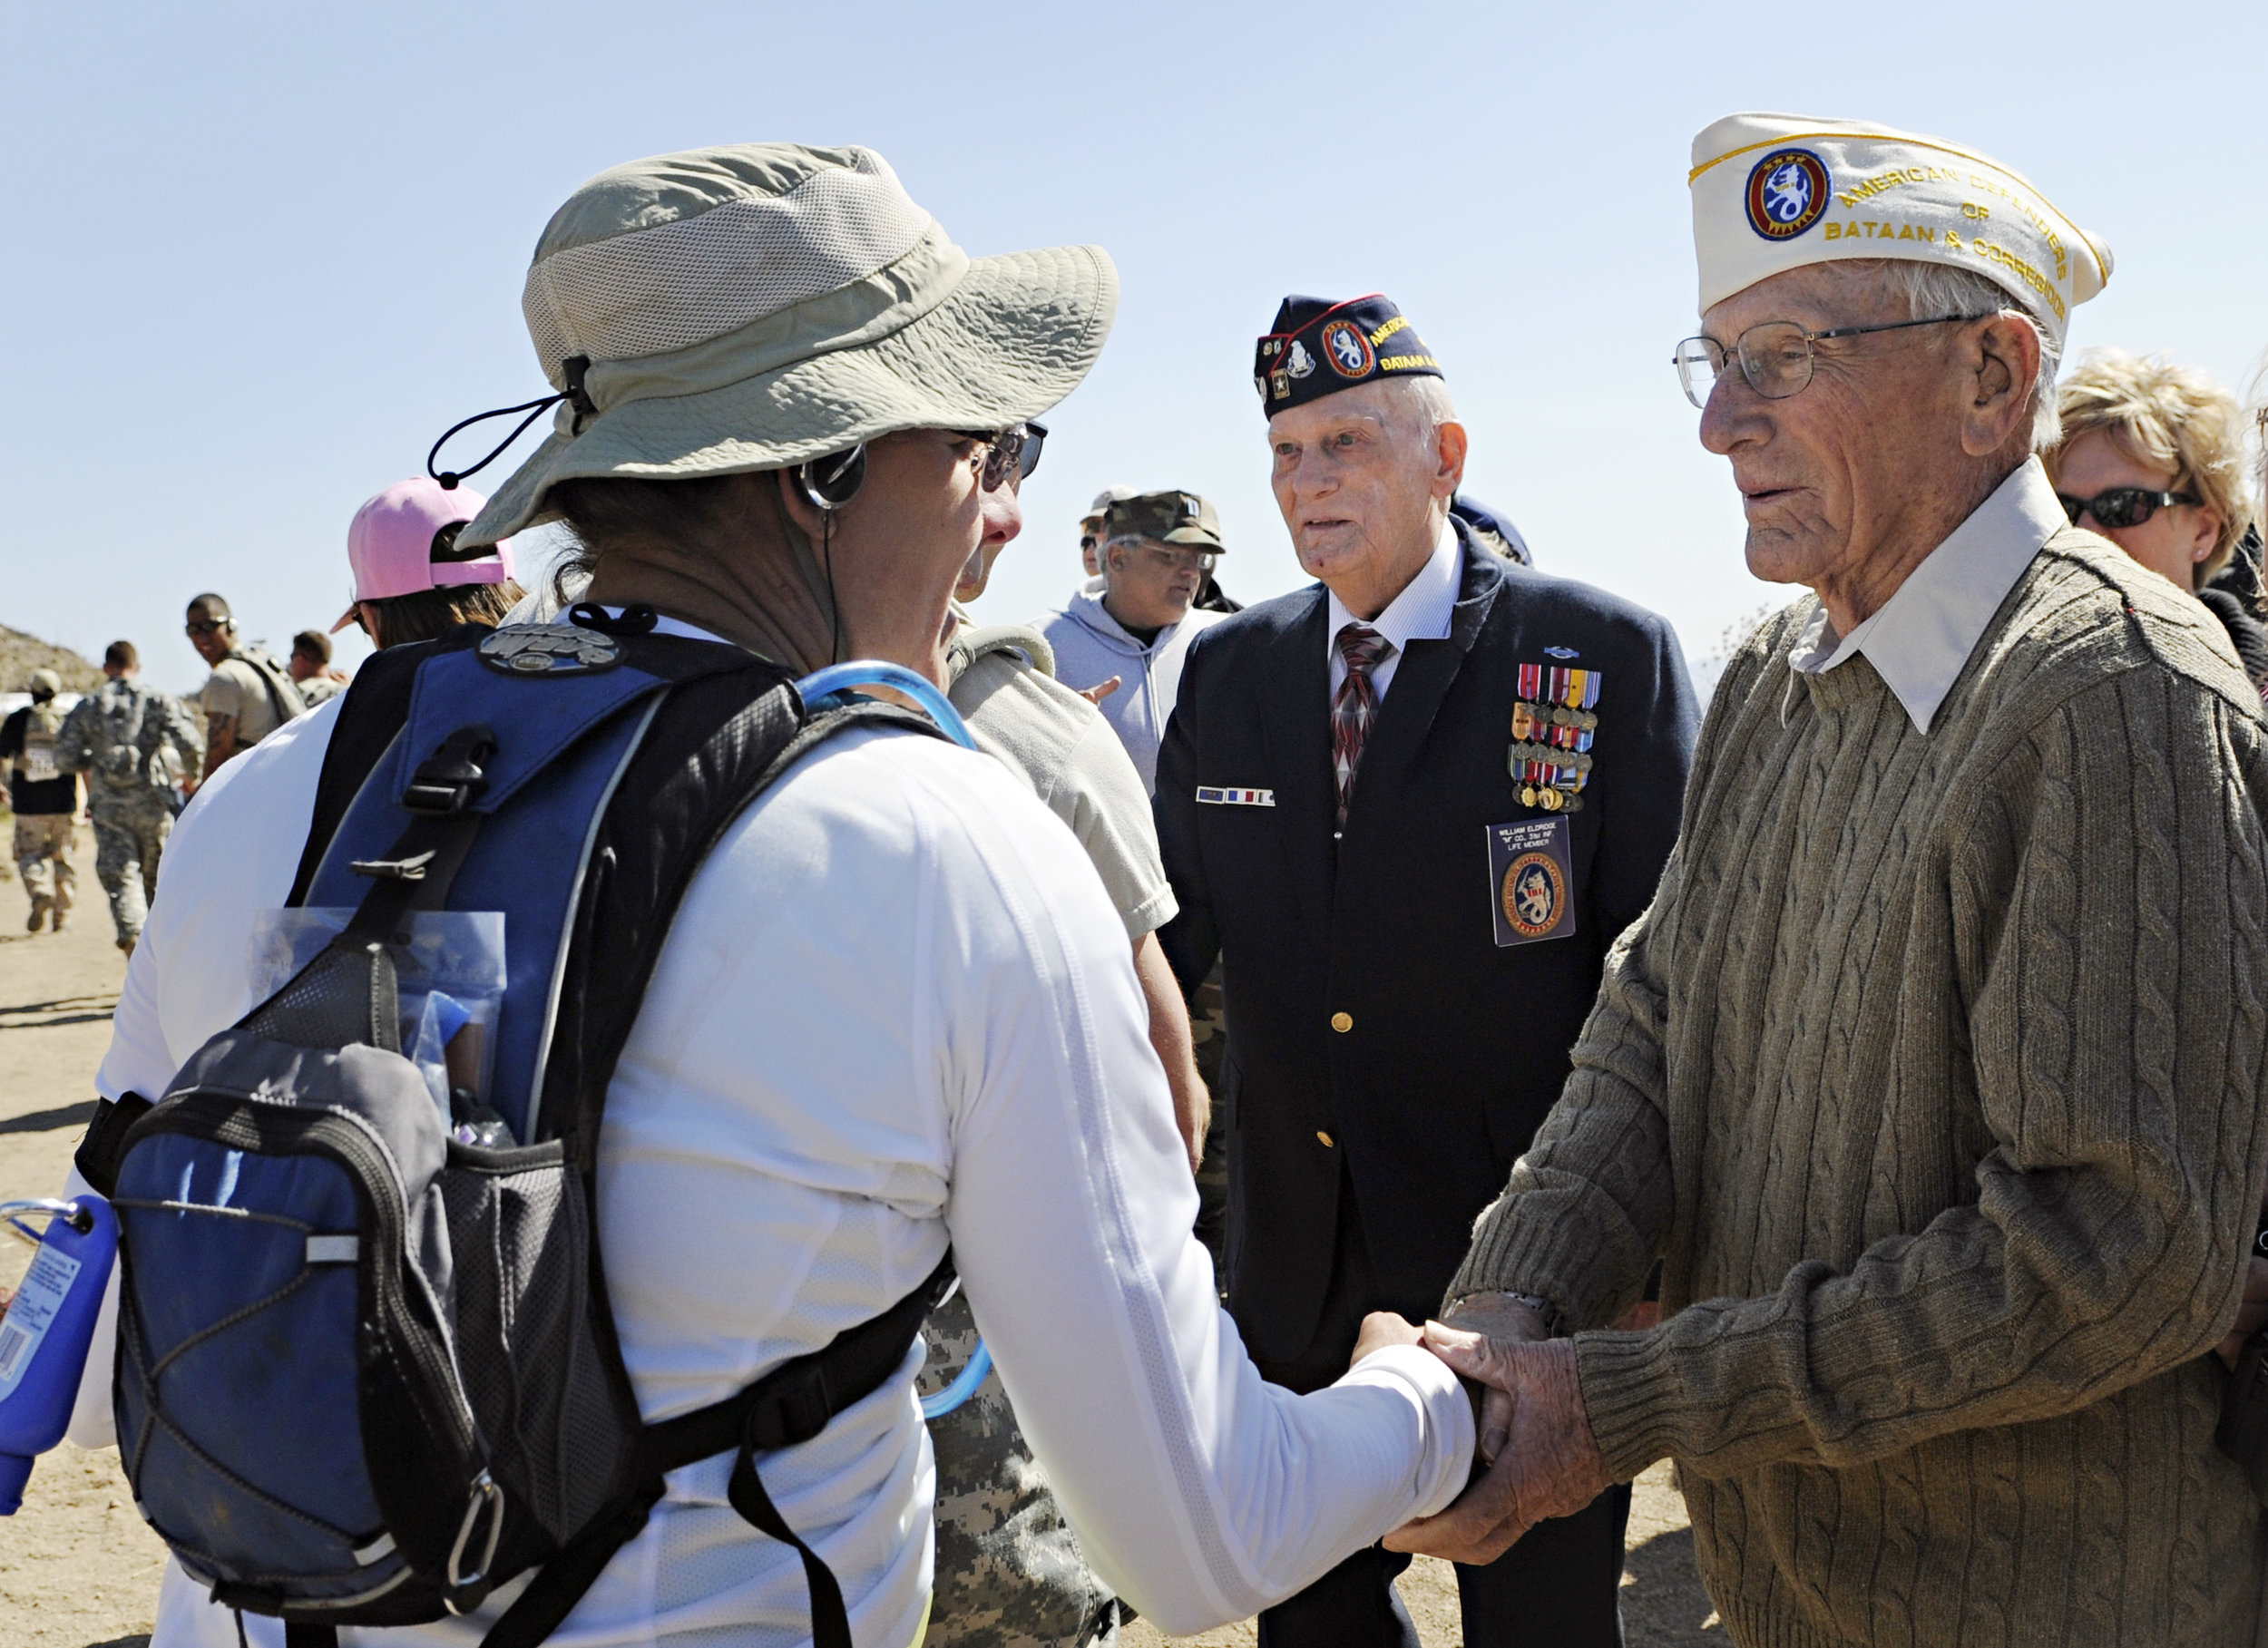  Bataan survivors Harold Bergbower, 90, from Peoria, AZ, at right, and William Eldridge, 88, from Citrus Heights, CA, greet runners at water point 7 during the 22nd Annual Bataan Memorial Death March at White Sands Missile Range, Sunday, March 27, 20